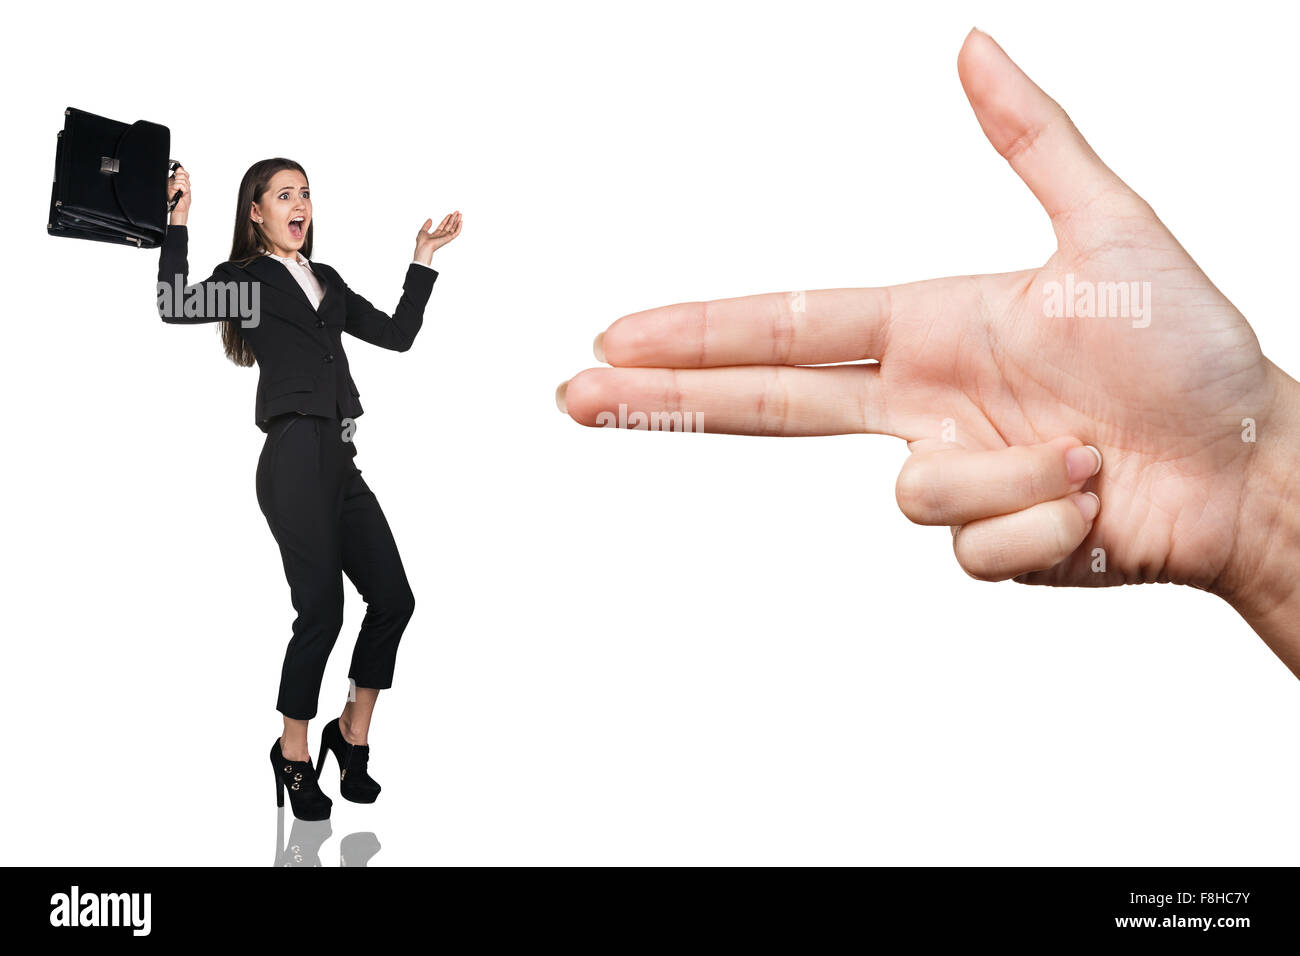 Hand threaten with gun gesture young woman Stock Photo